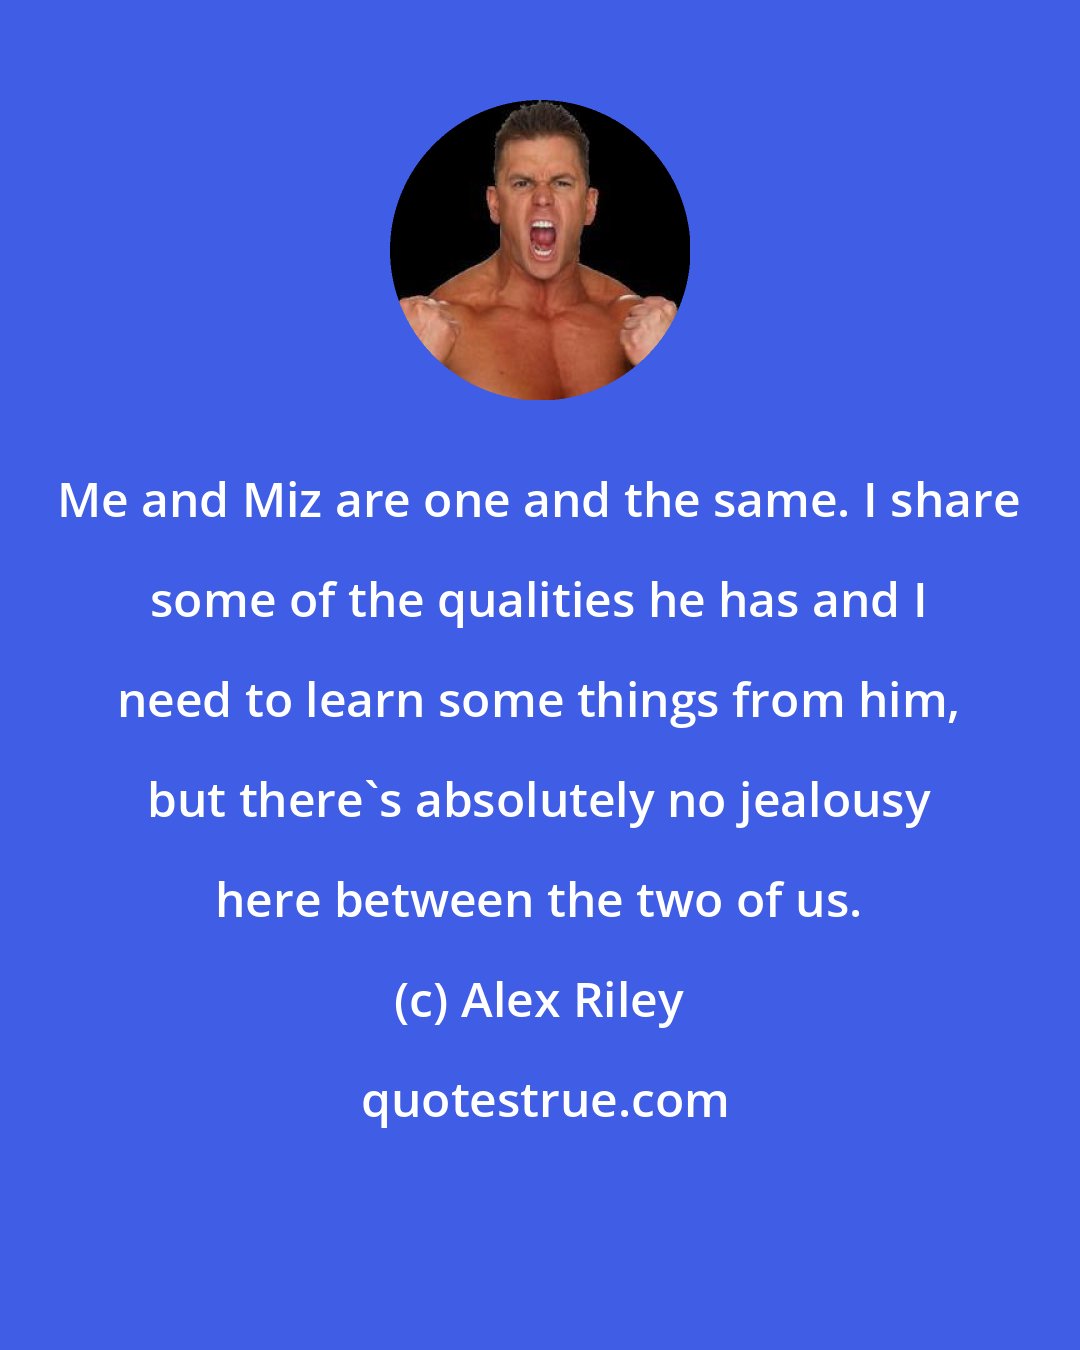 Alex Riley: Me and Miz are one and the same. I share some of the qualities he has and I need to learn some things from him, but there's absolutely no jealousy here between the two of us.